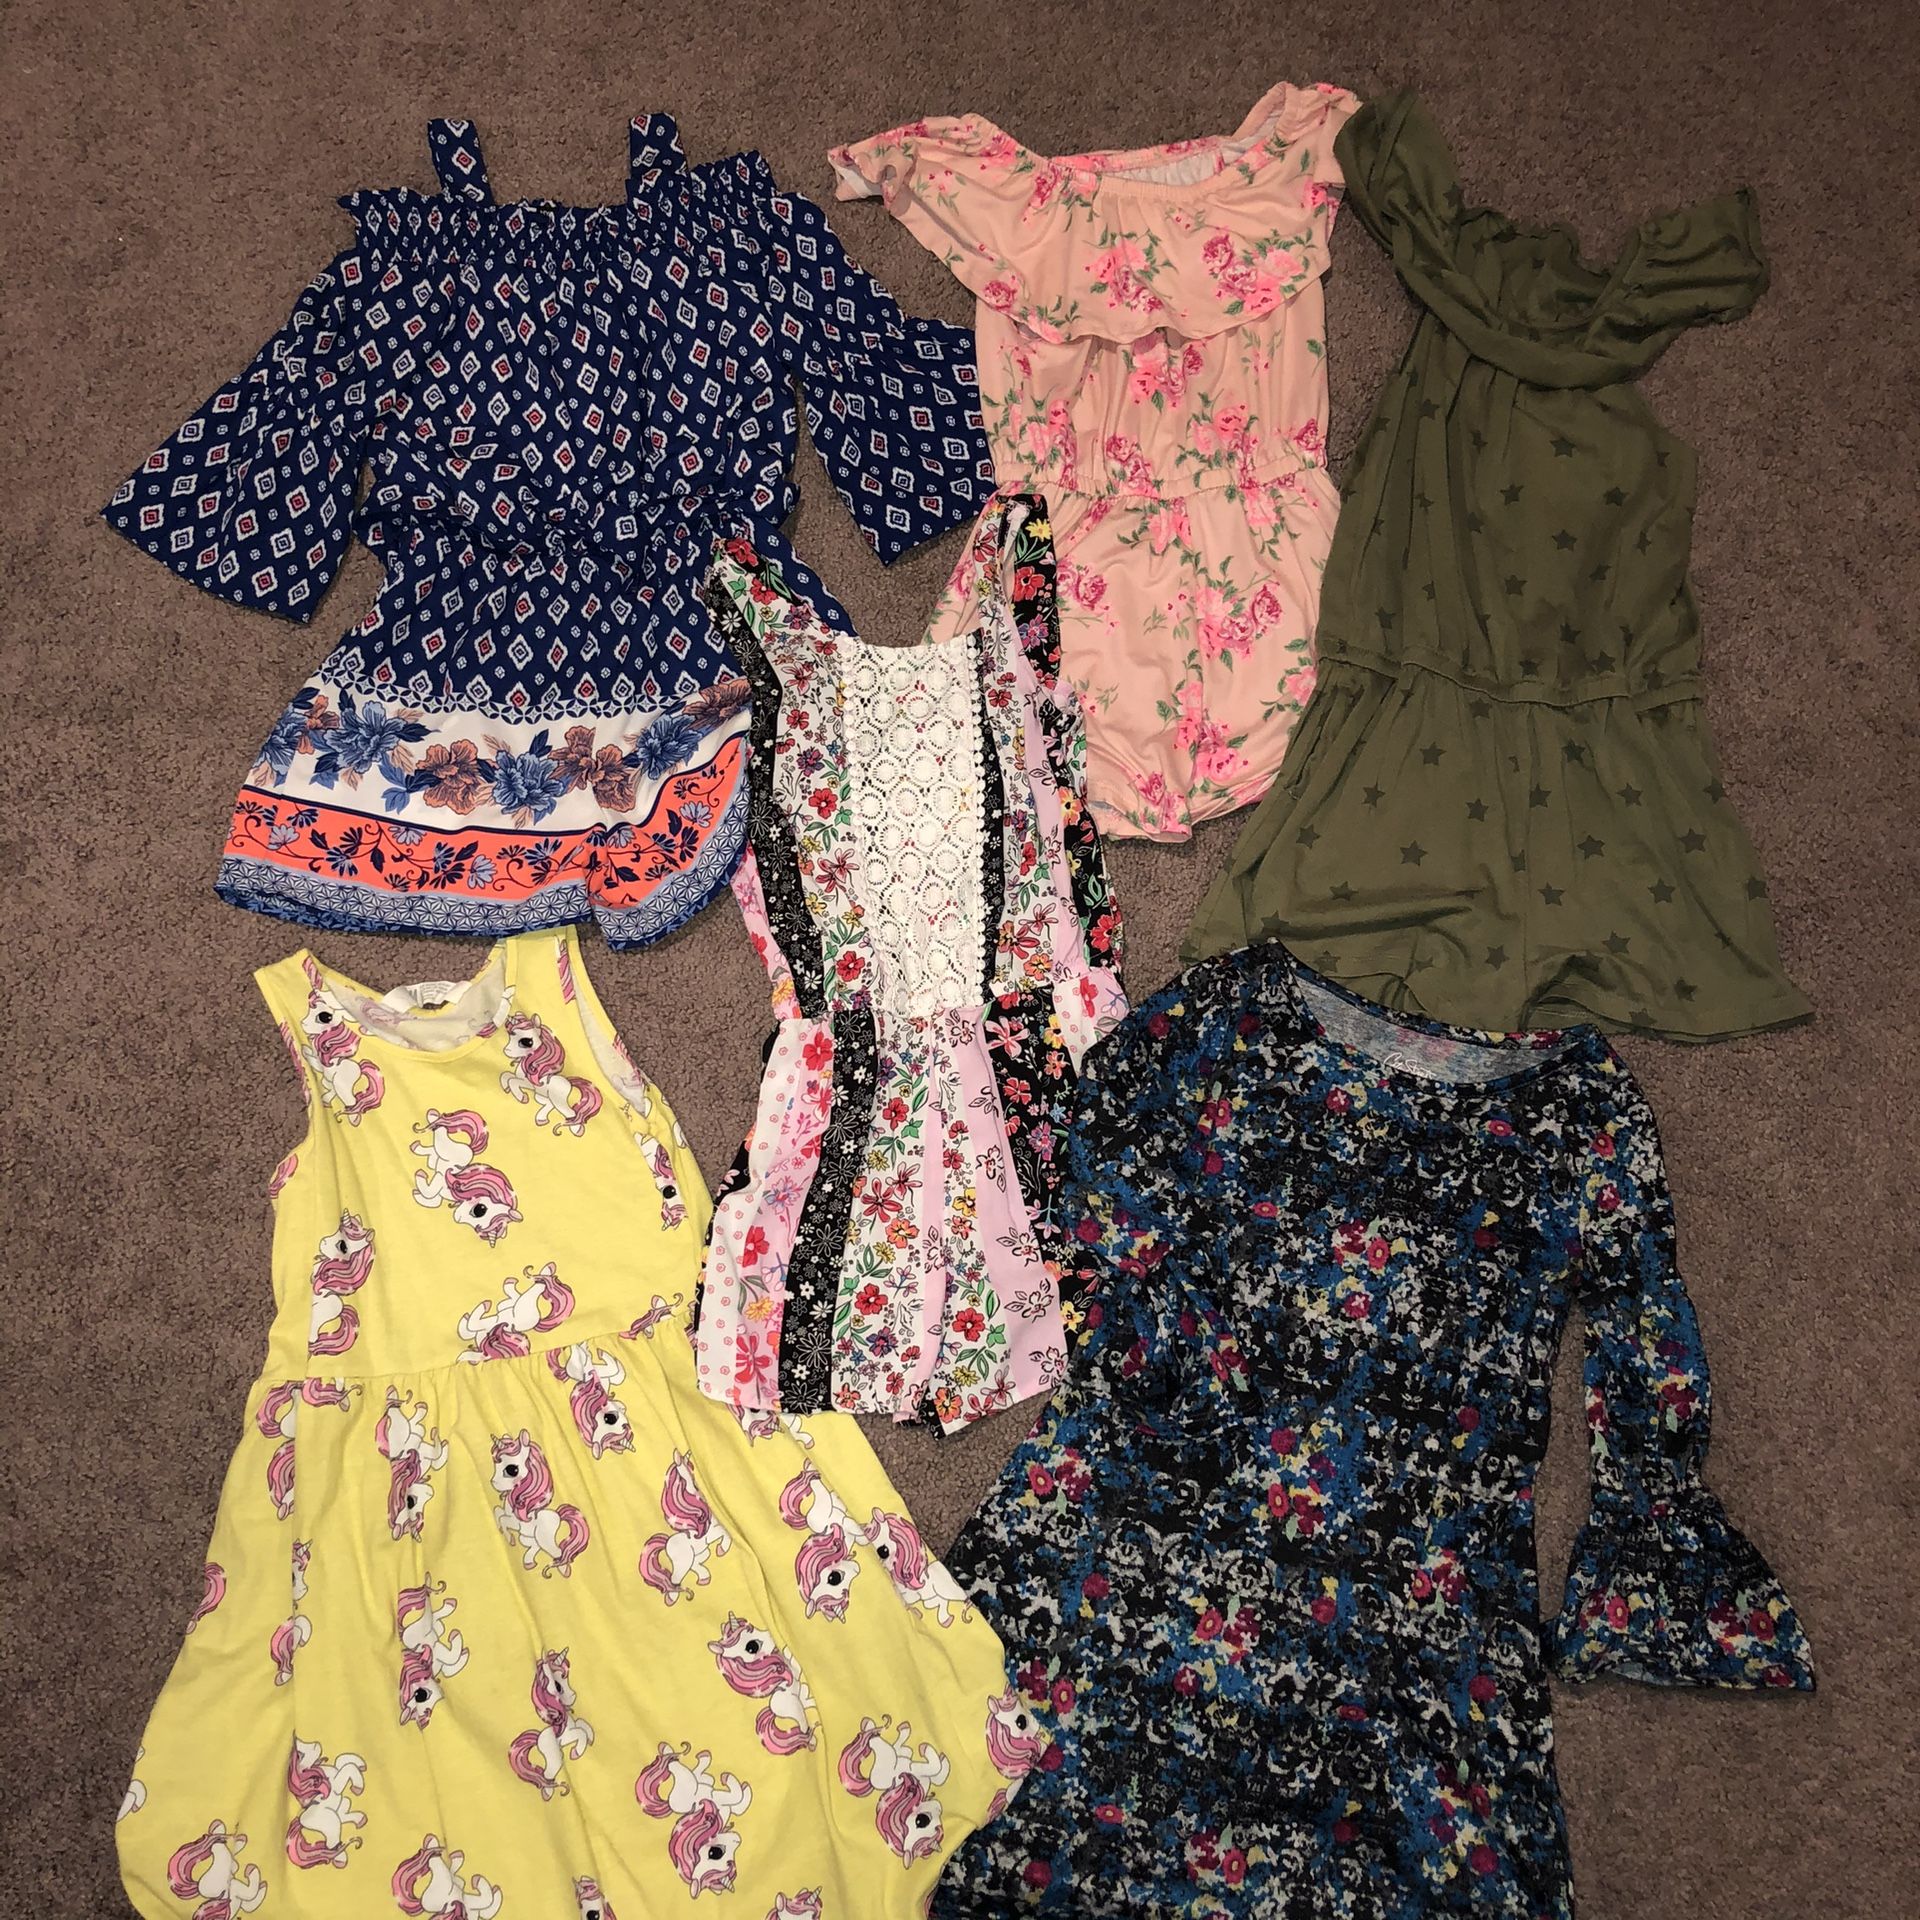 Girls bundle rompers and dresses Size M 7/8